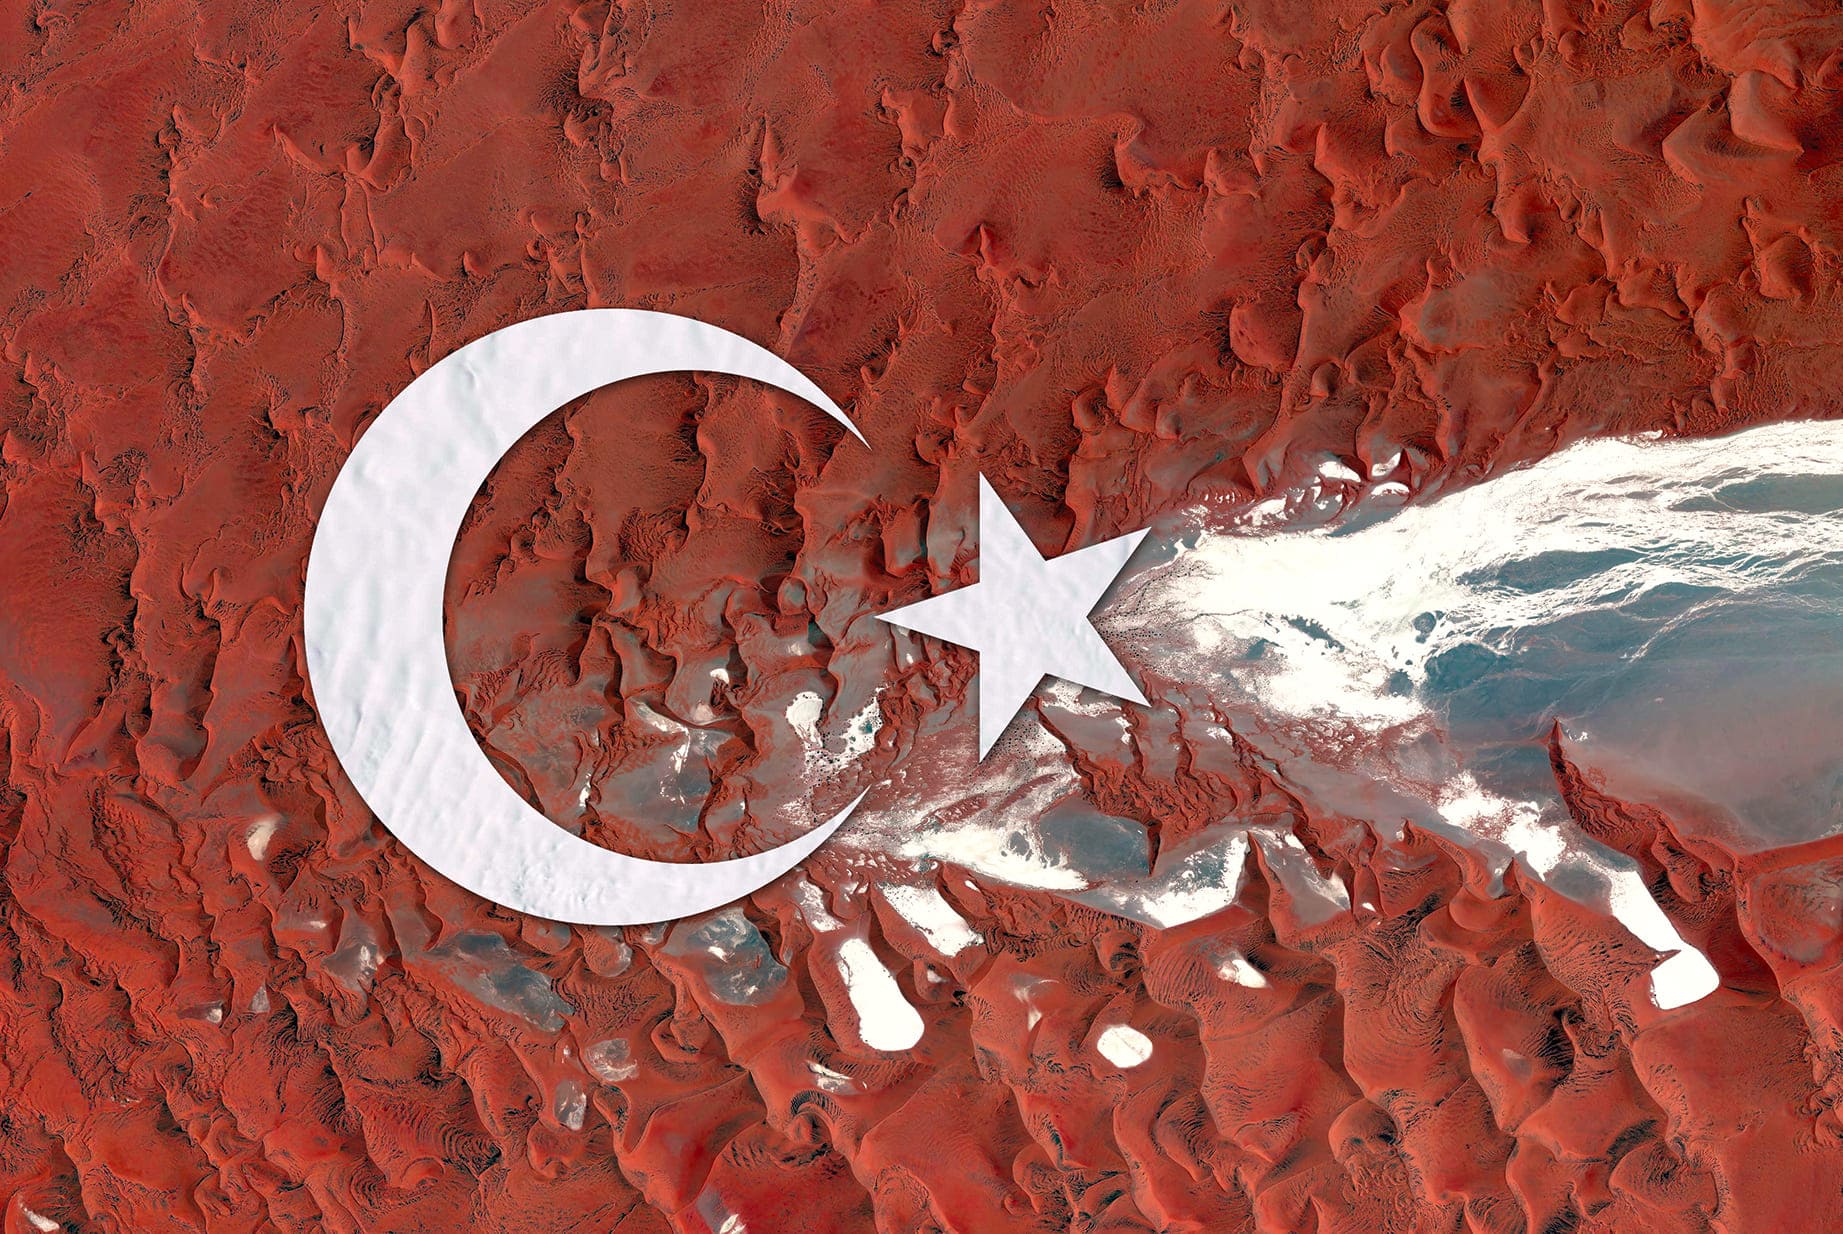 TURKEY EARTH FLAG, 2016, DIGITAL COLLAGE OF SATELLITE PHOTOGRAPHY FROM NAMIBIA, ANTARCTICA, diasec print CM 67×100, limited edition 9